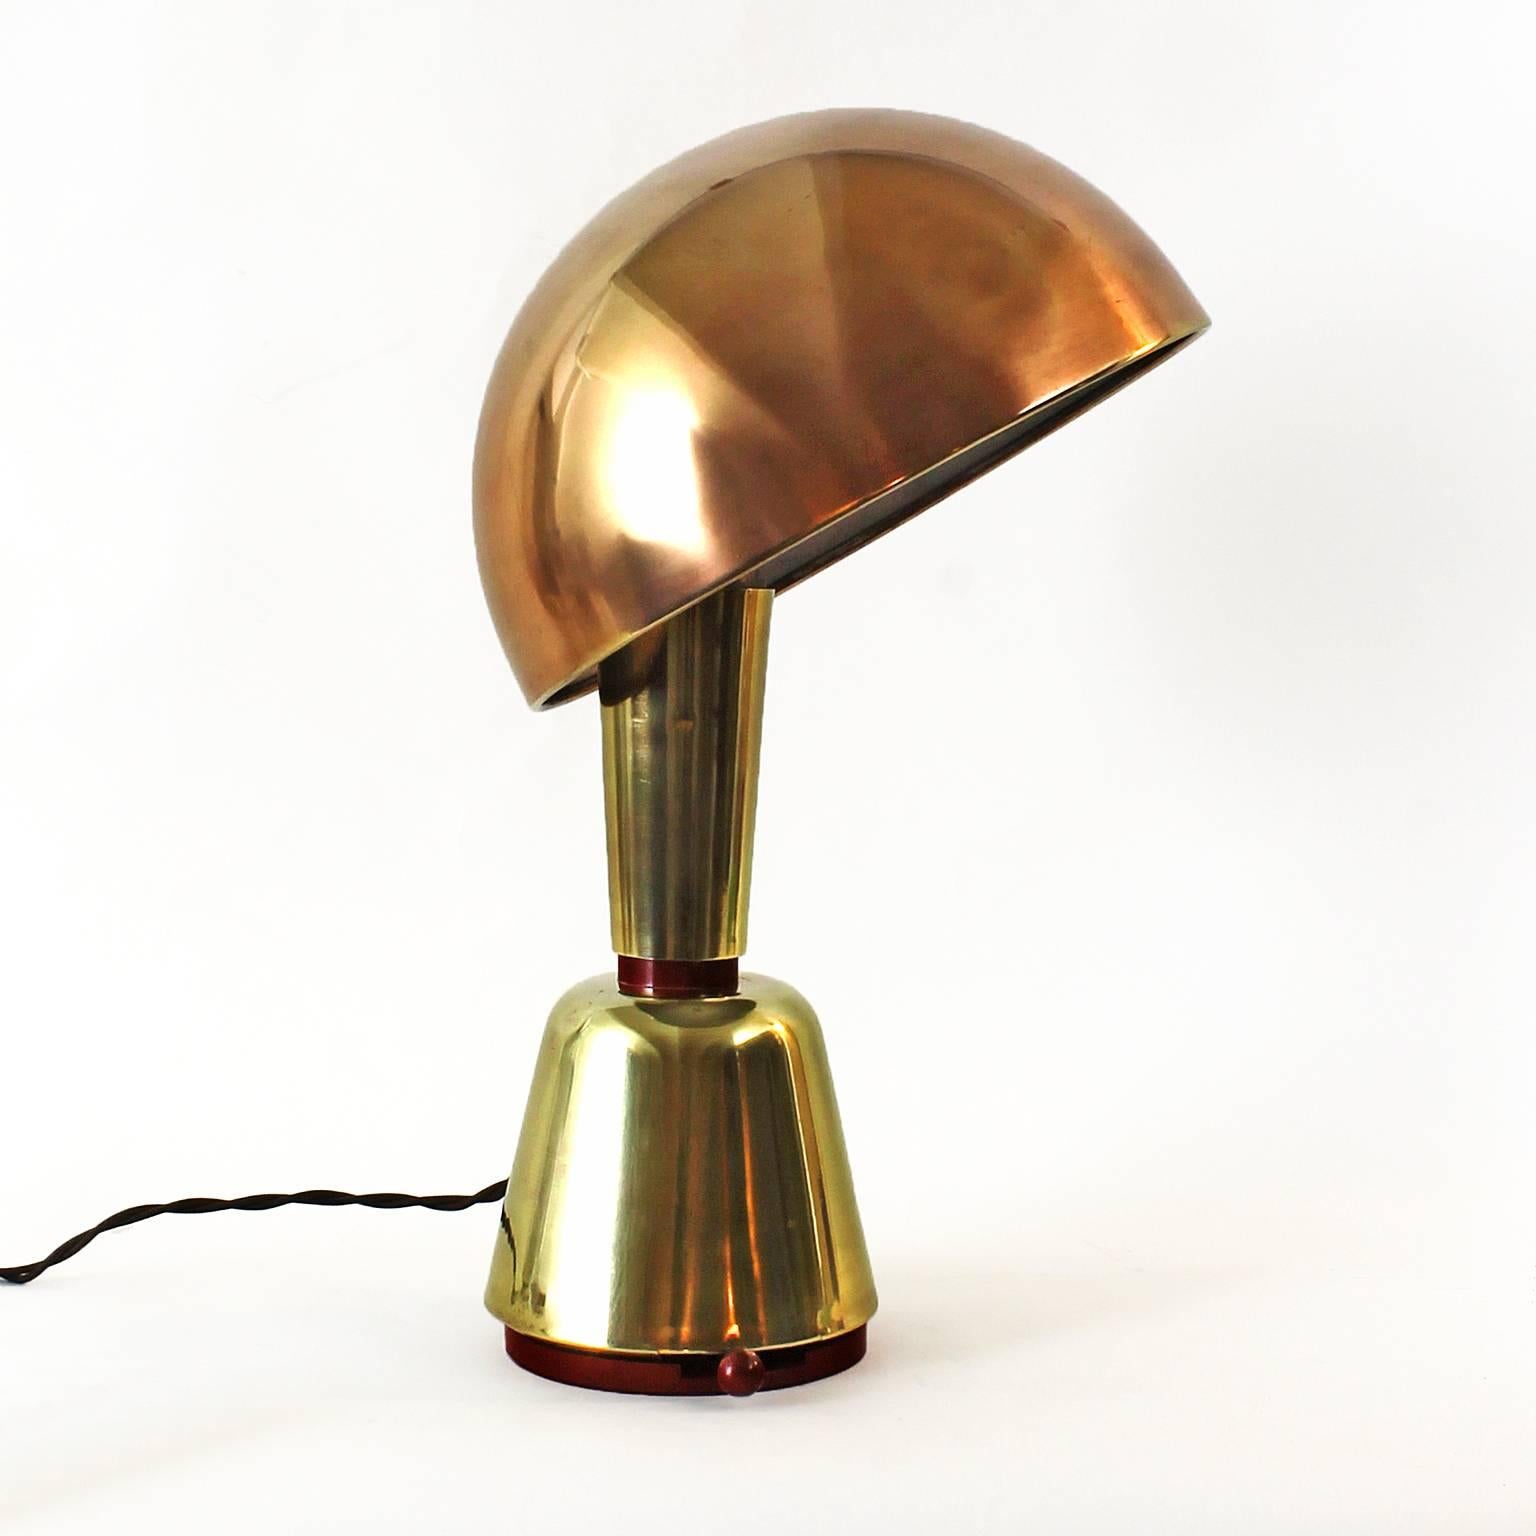 Art Deco desk lamp, brass, copper and bakelite, swivel lampshade, originally with variable light for 20 volts adapted to 220 volts (normal voltage,)
Italy, circa 1930.